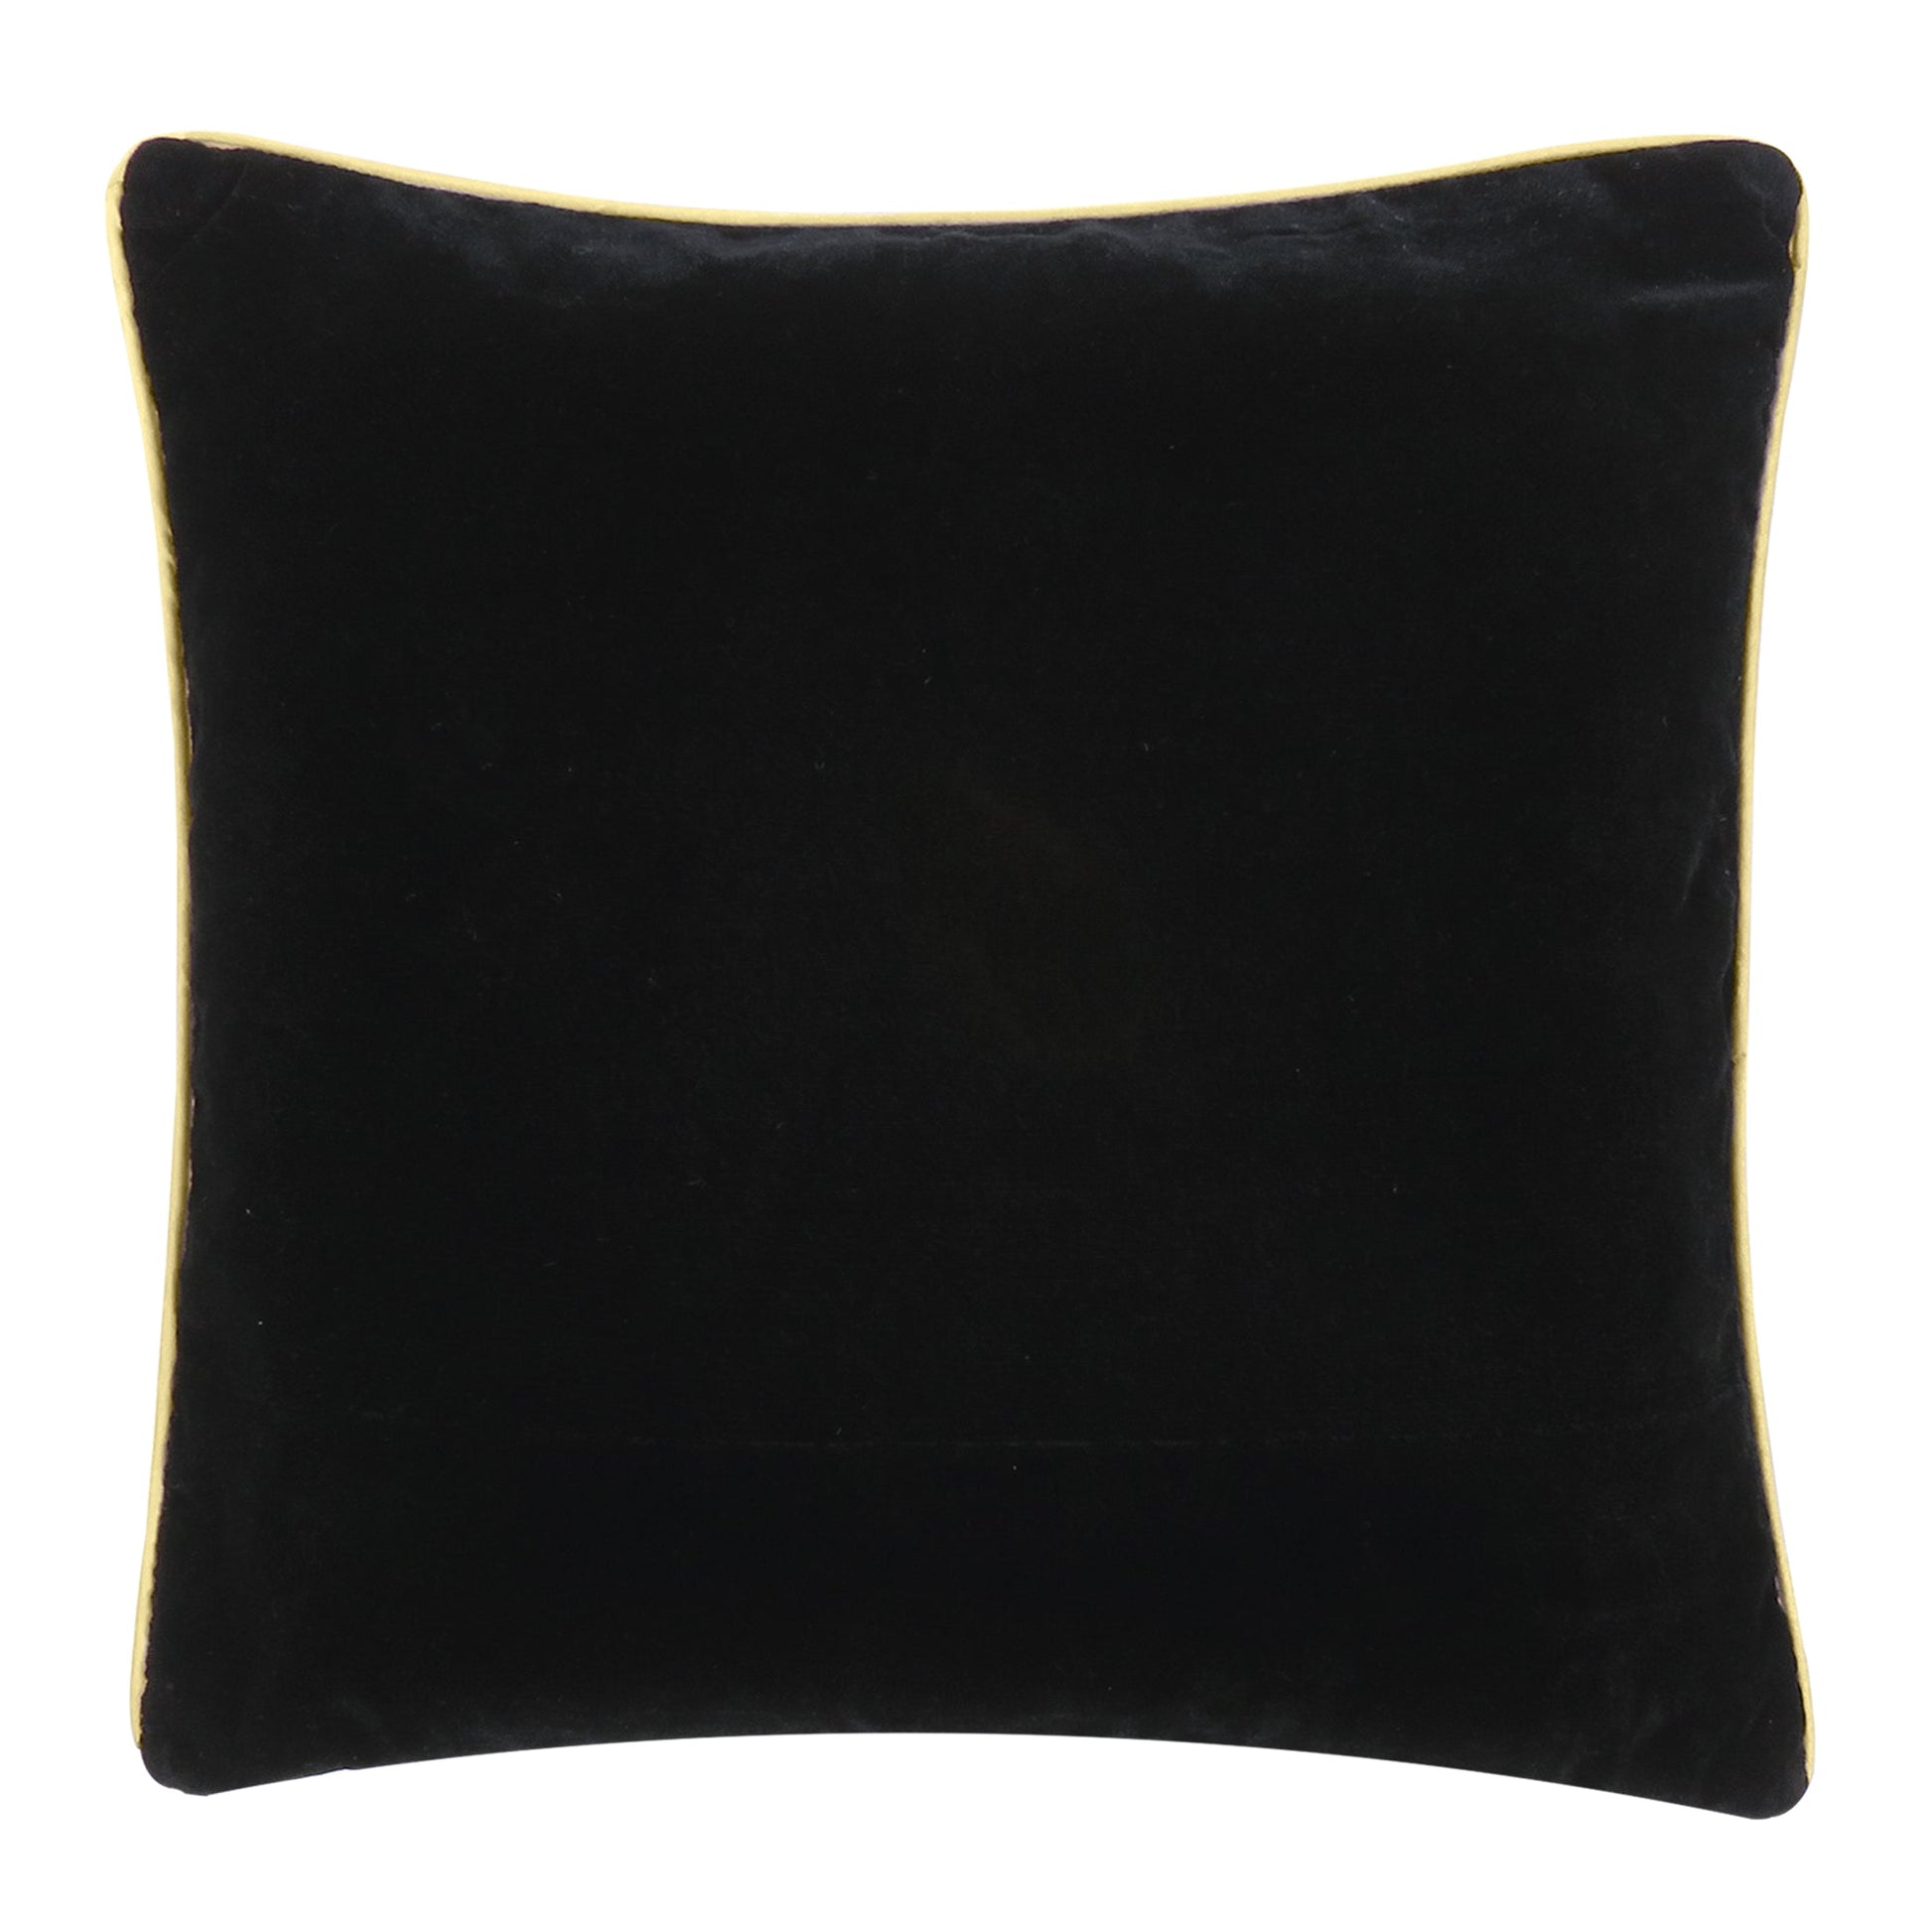 Black Velvet Cushion Cover with Gold Piping Edge in Set of 2